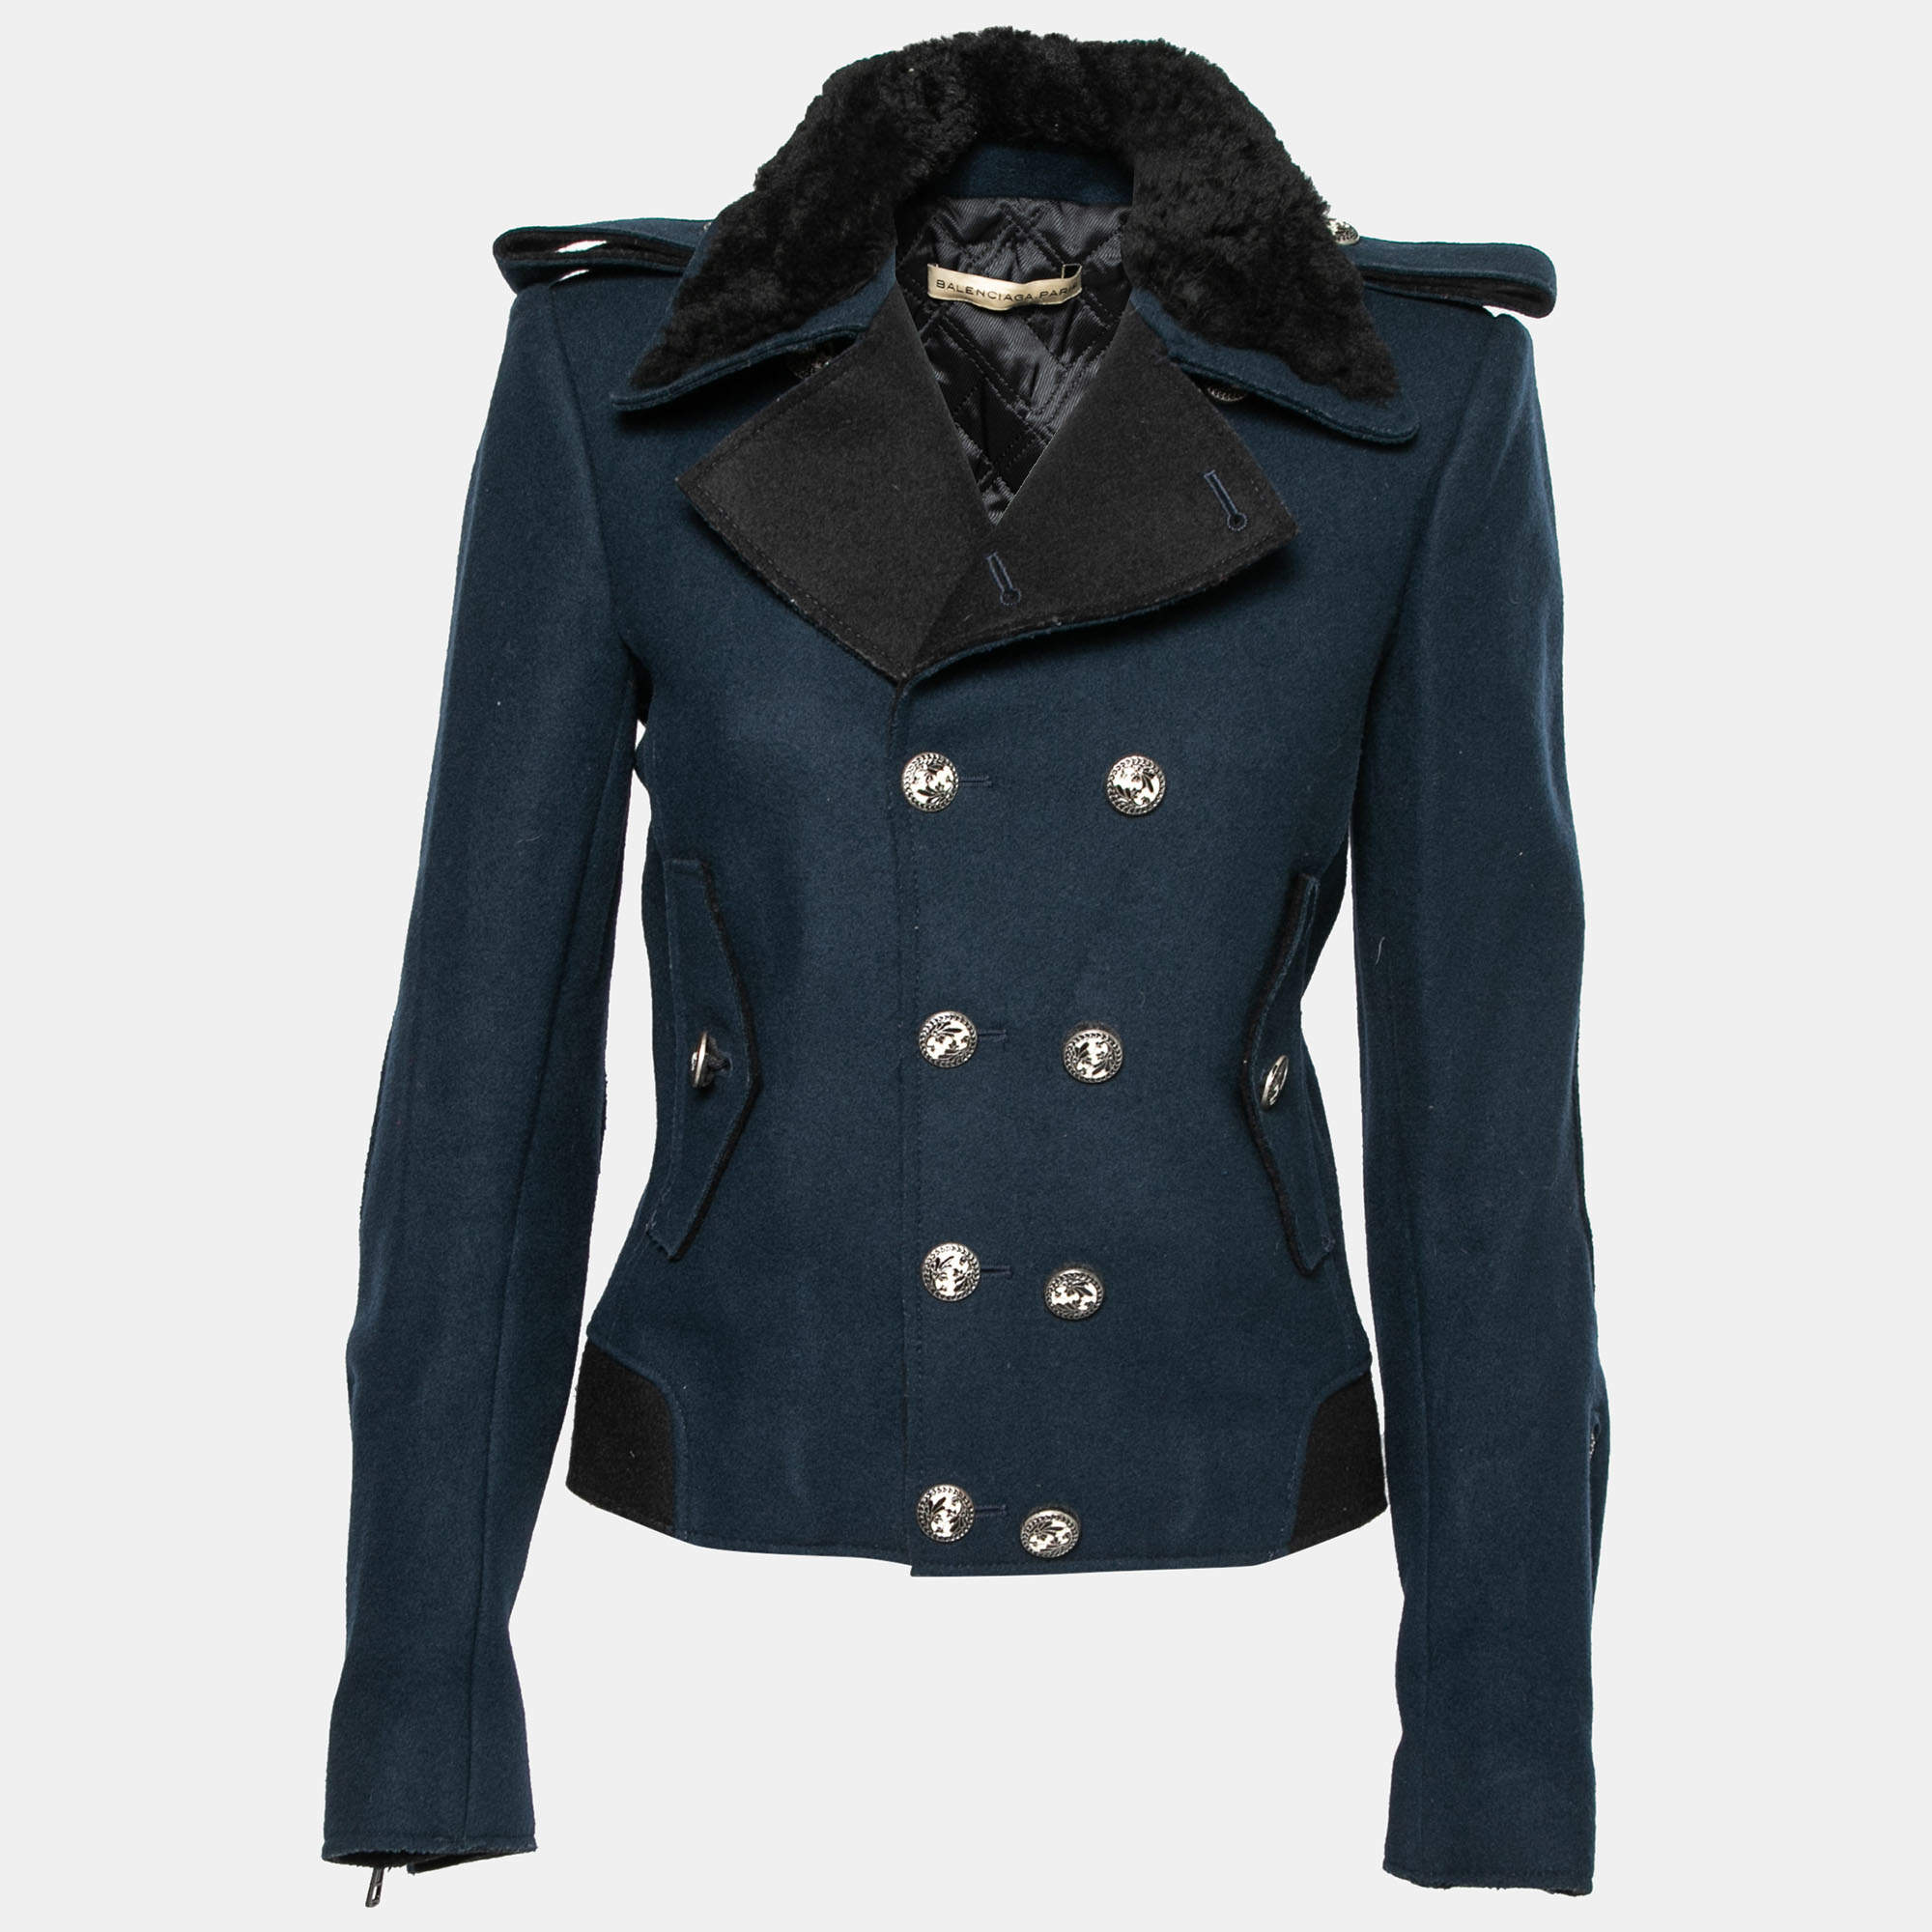 Balenciaga Navy Blue Wool Shearling Trimmed Double Breasted Jacket M